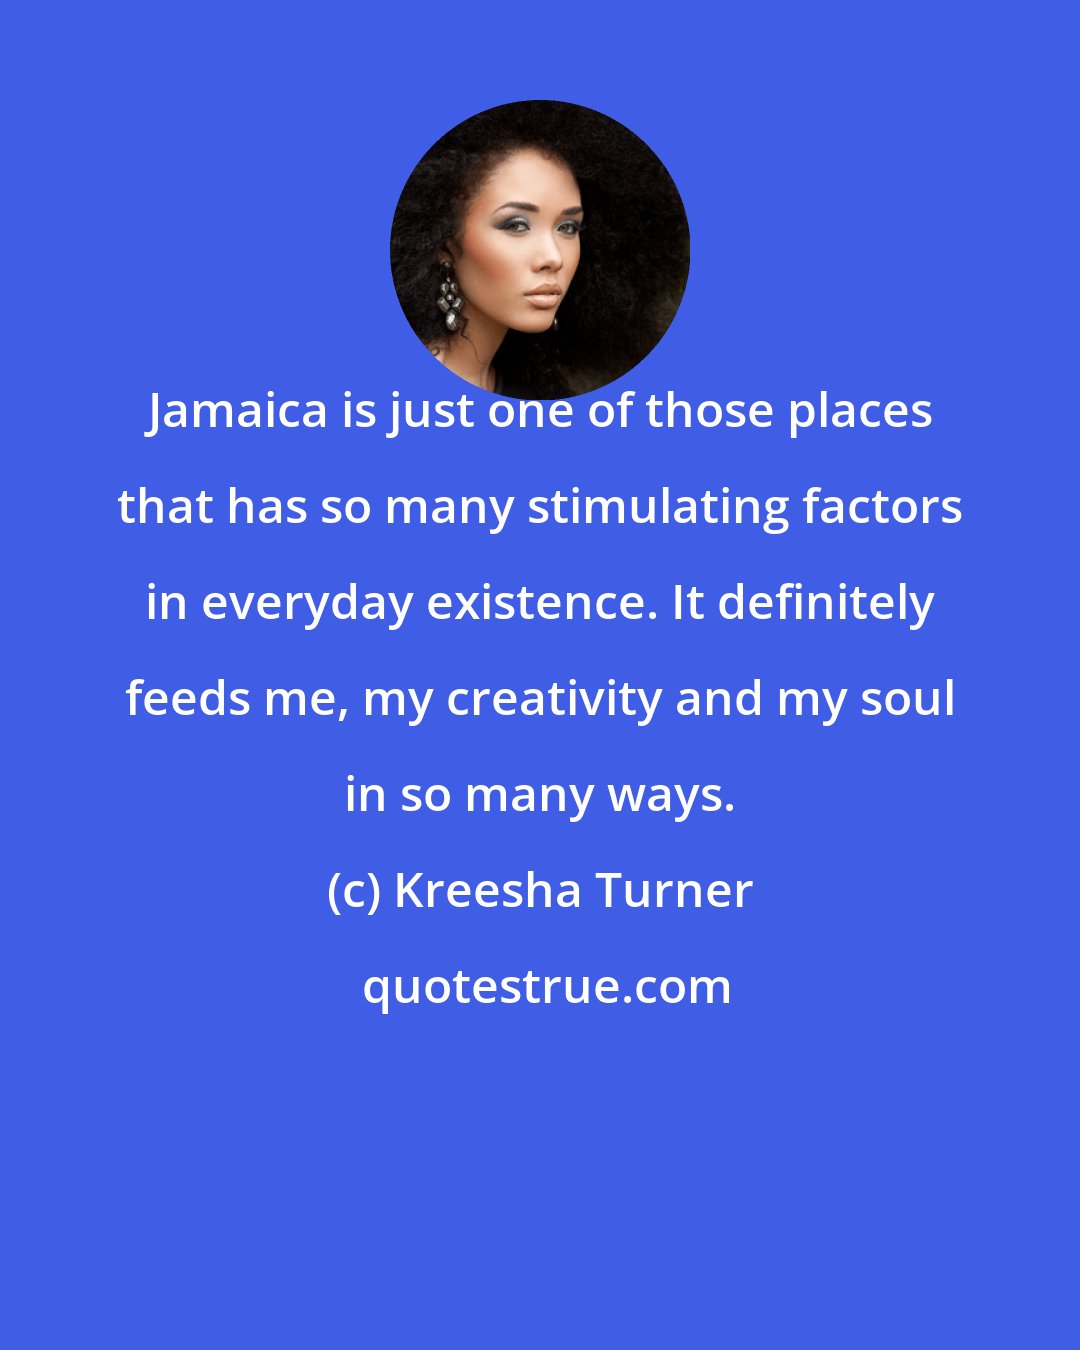 Kreesha Turner: Jamaica is just one of those places that has so many stimulating factors in everyday existence. It definitely feeds me, my creativity and my soul in so many ways.